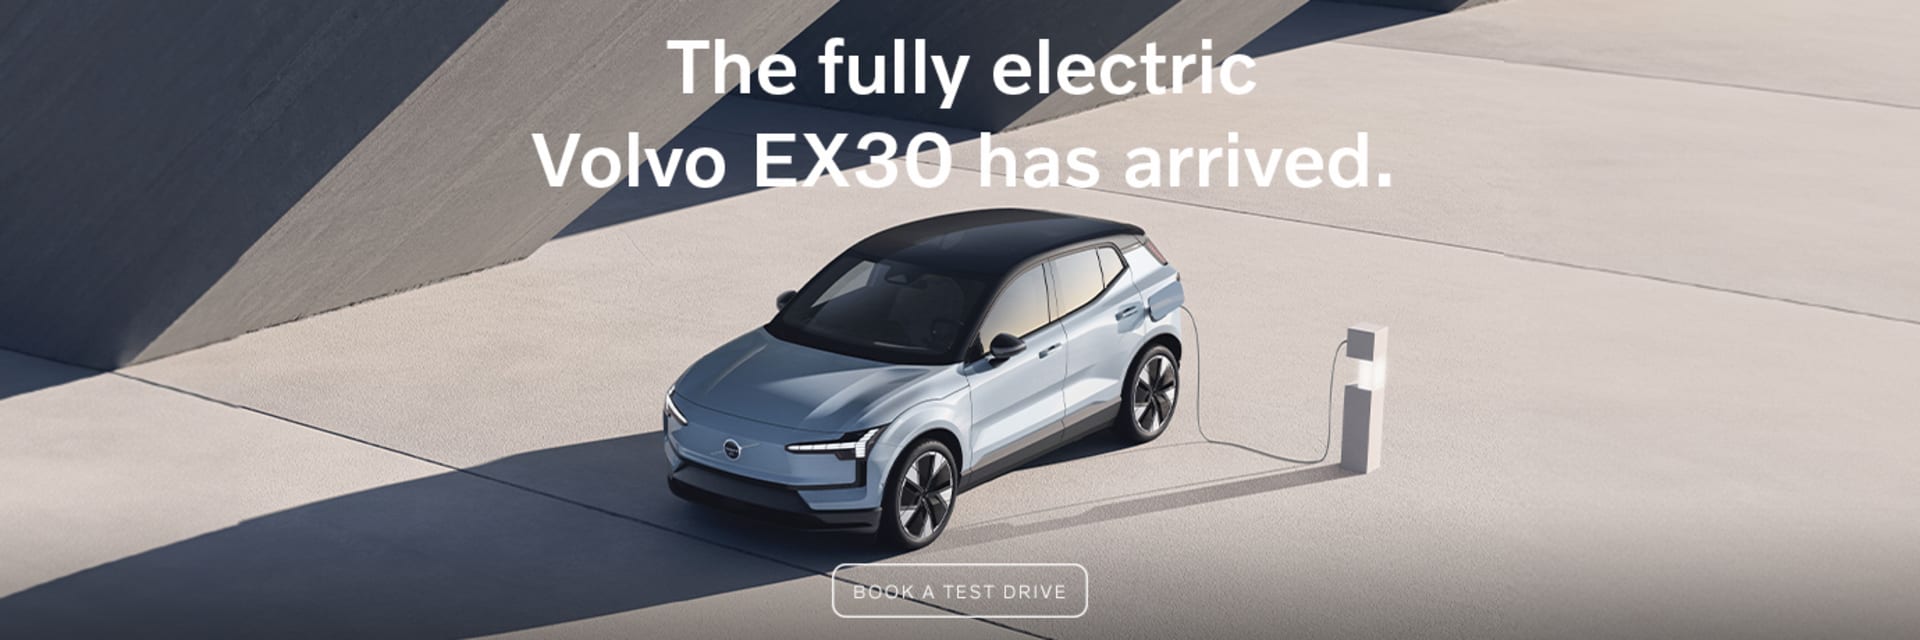 The Fully Electric Volvo EX30 has Arrived